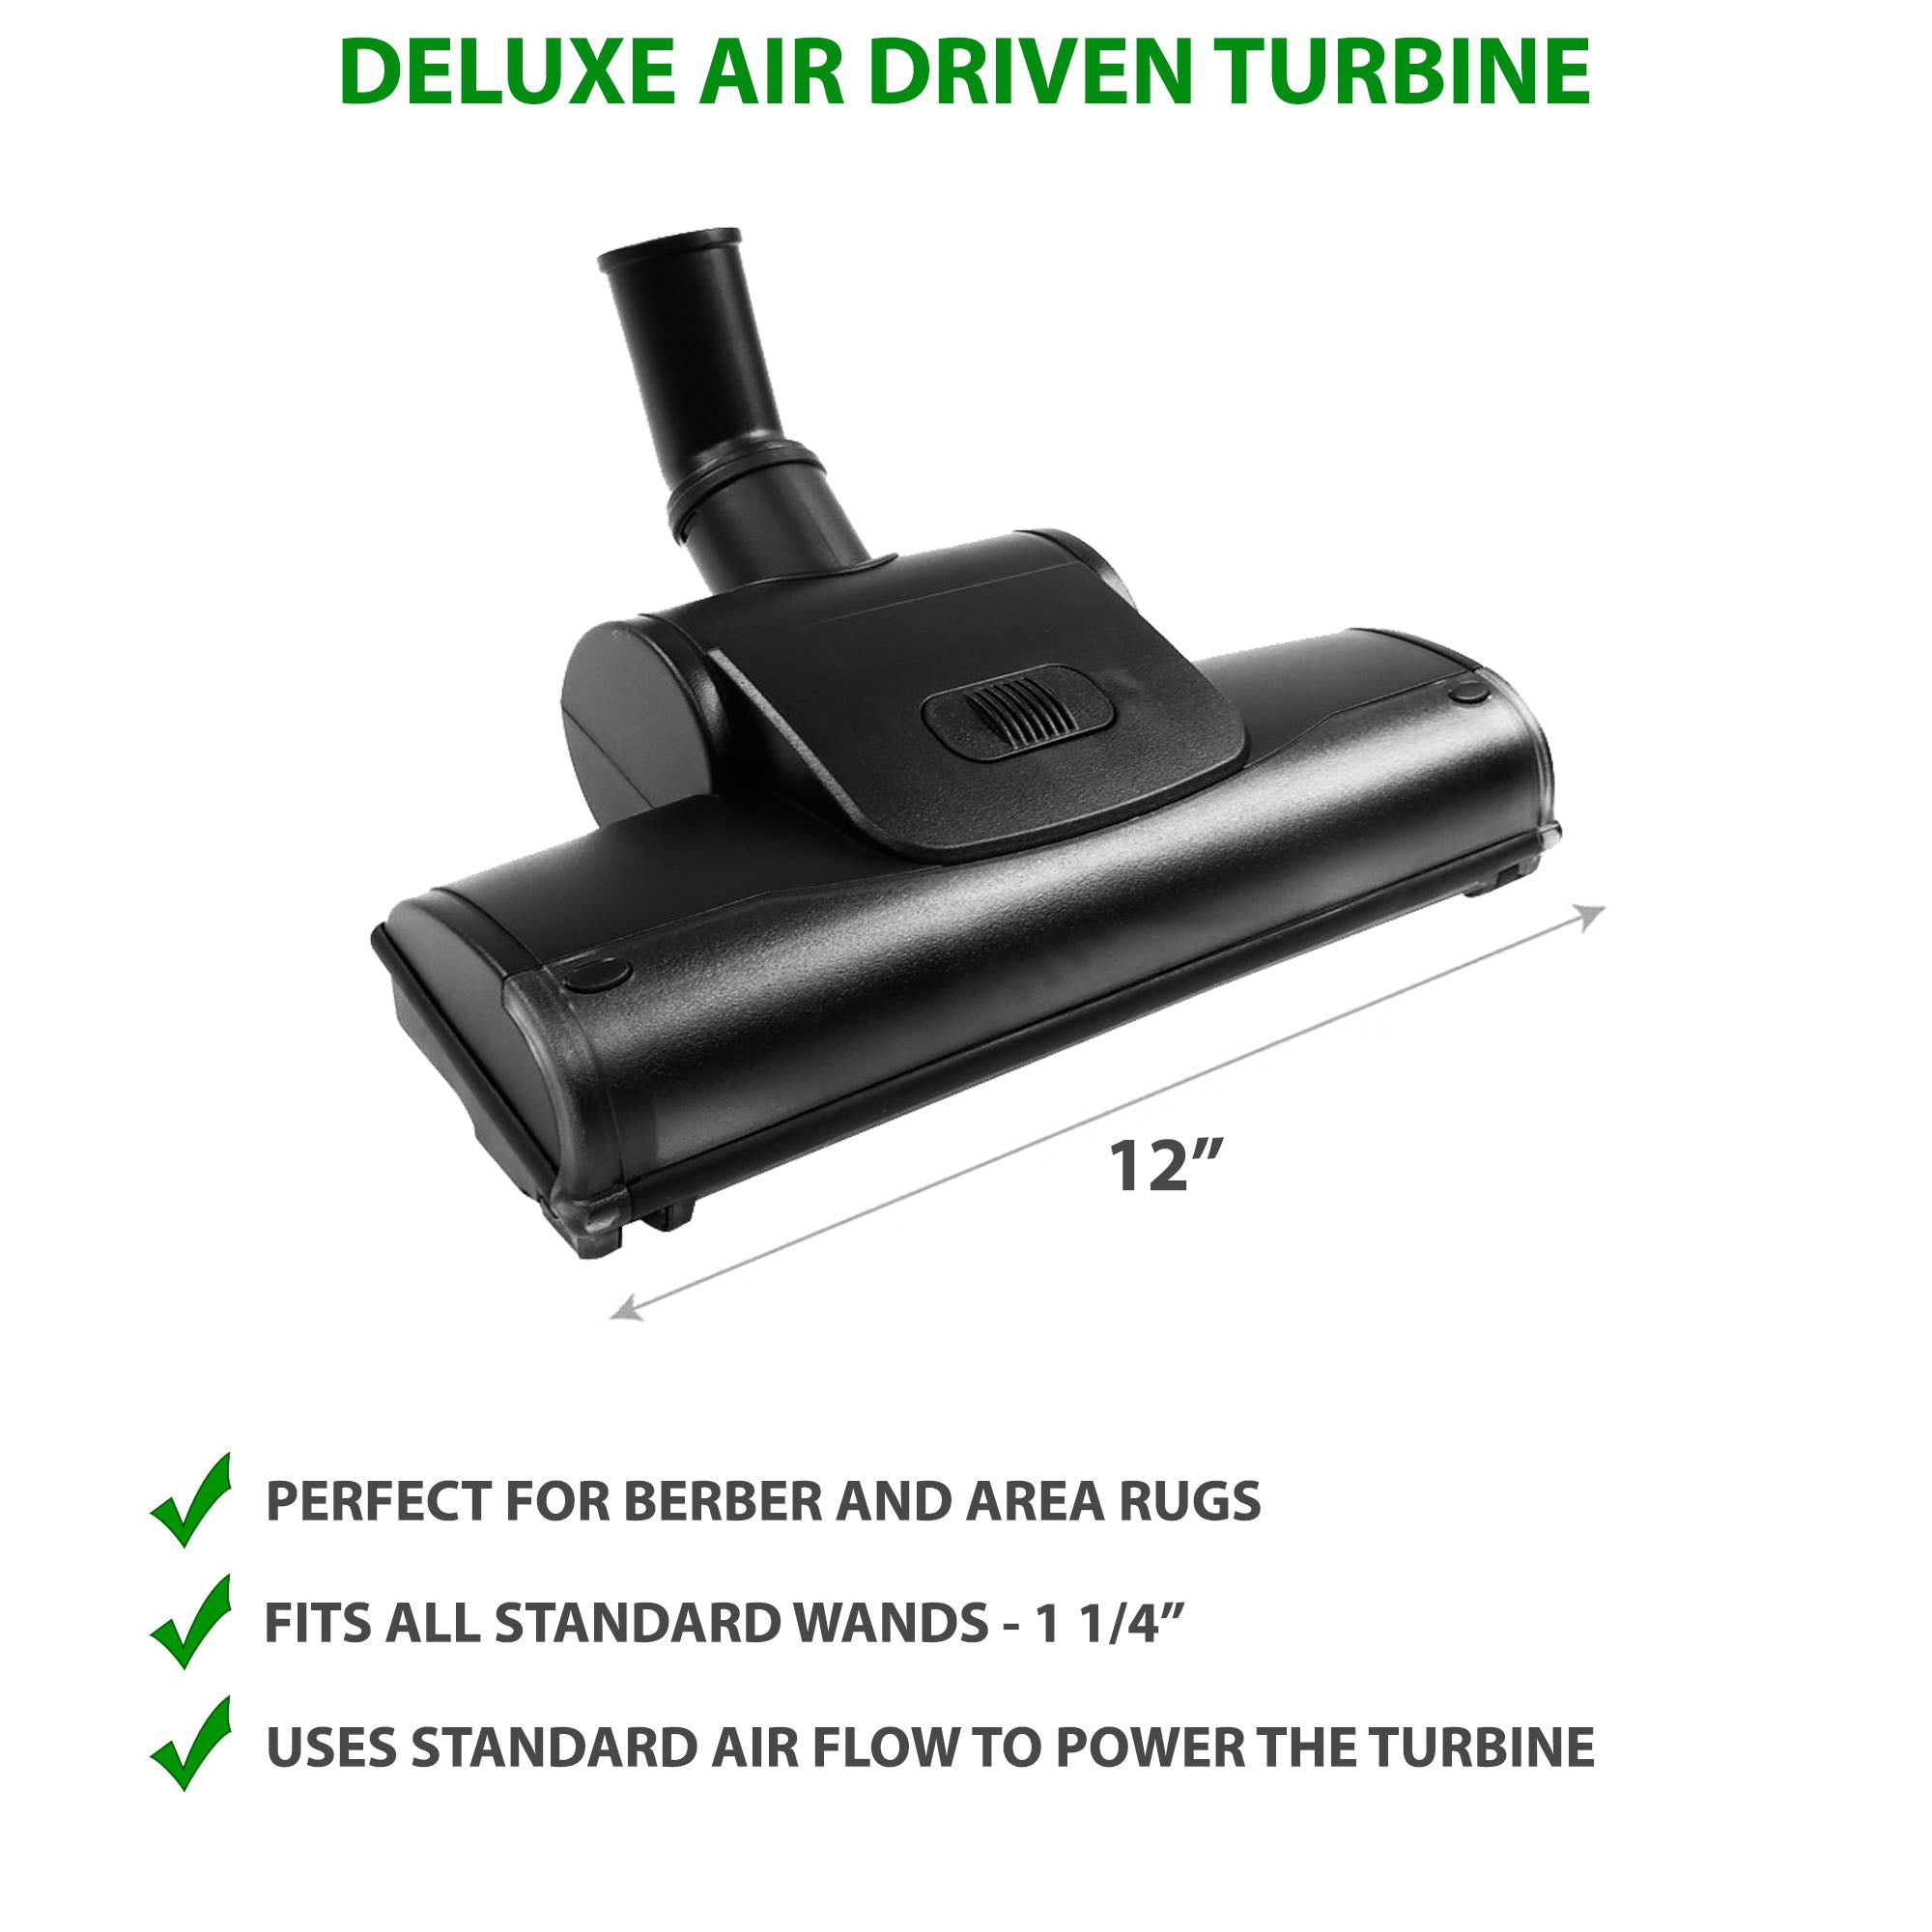 DrainVac G2-2X5 Central Vacuum Cleaner | 1040 Air Watts Motor | Deluxe Air Package